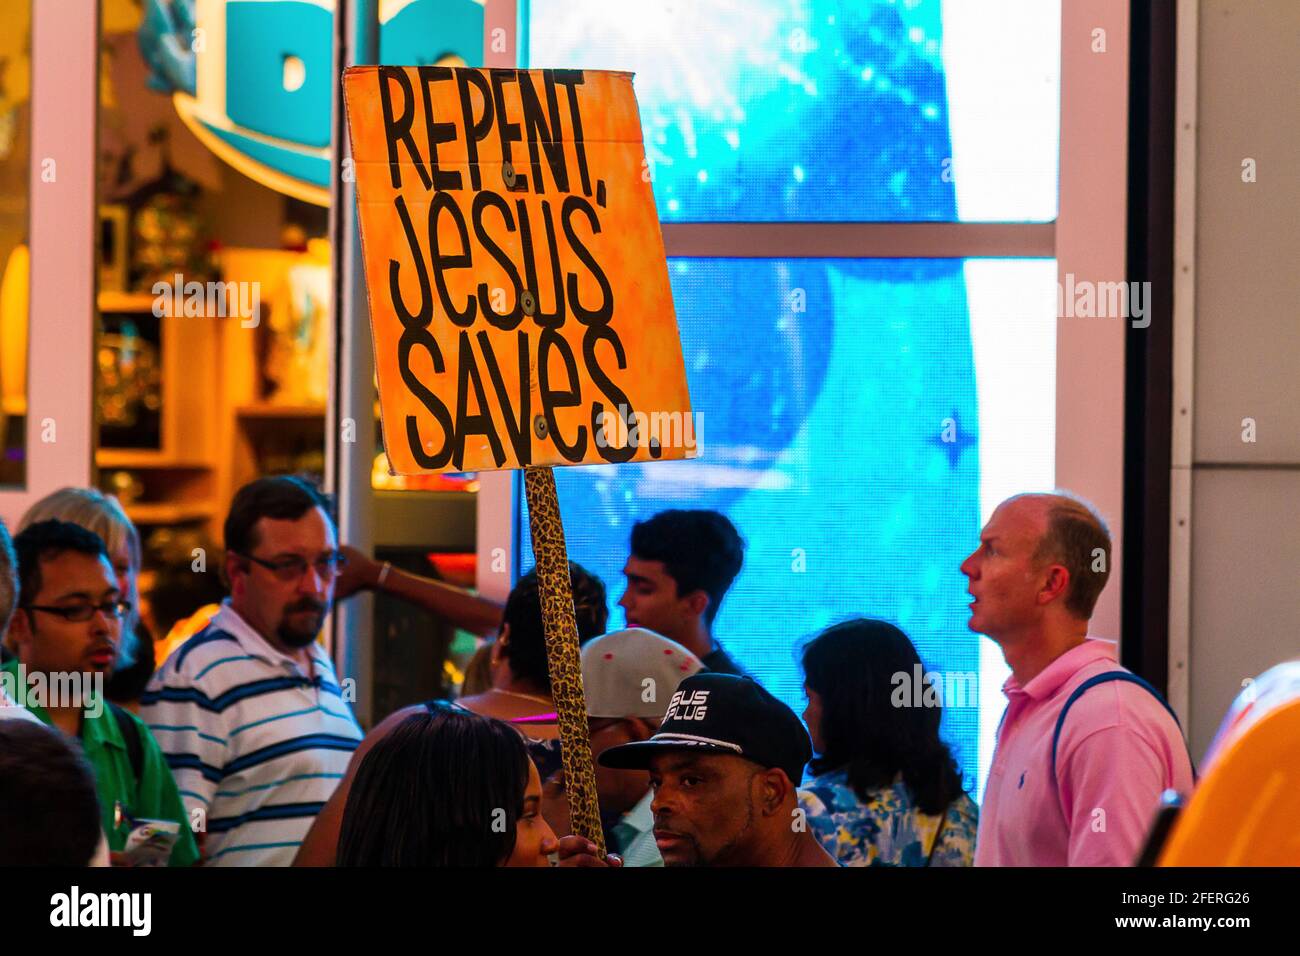 A group of missionary workers carrying 'Repent, Jesus Saves' placard at Times Square Stock Photo